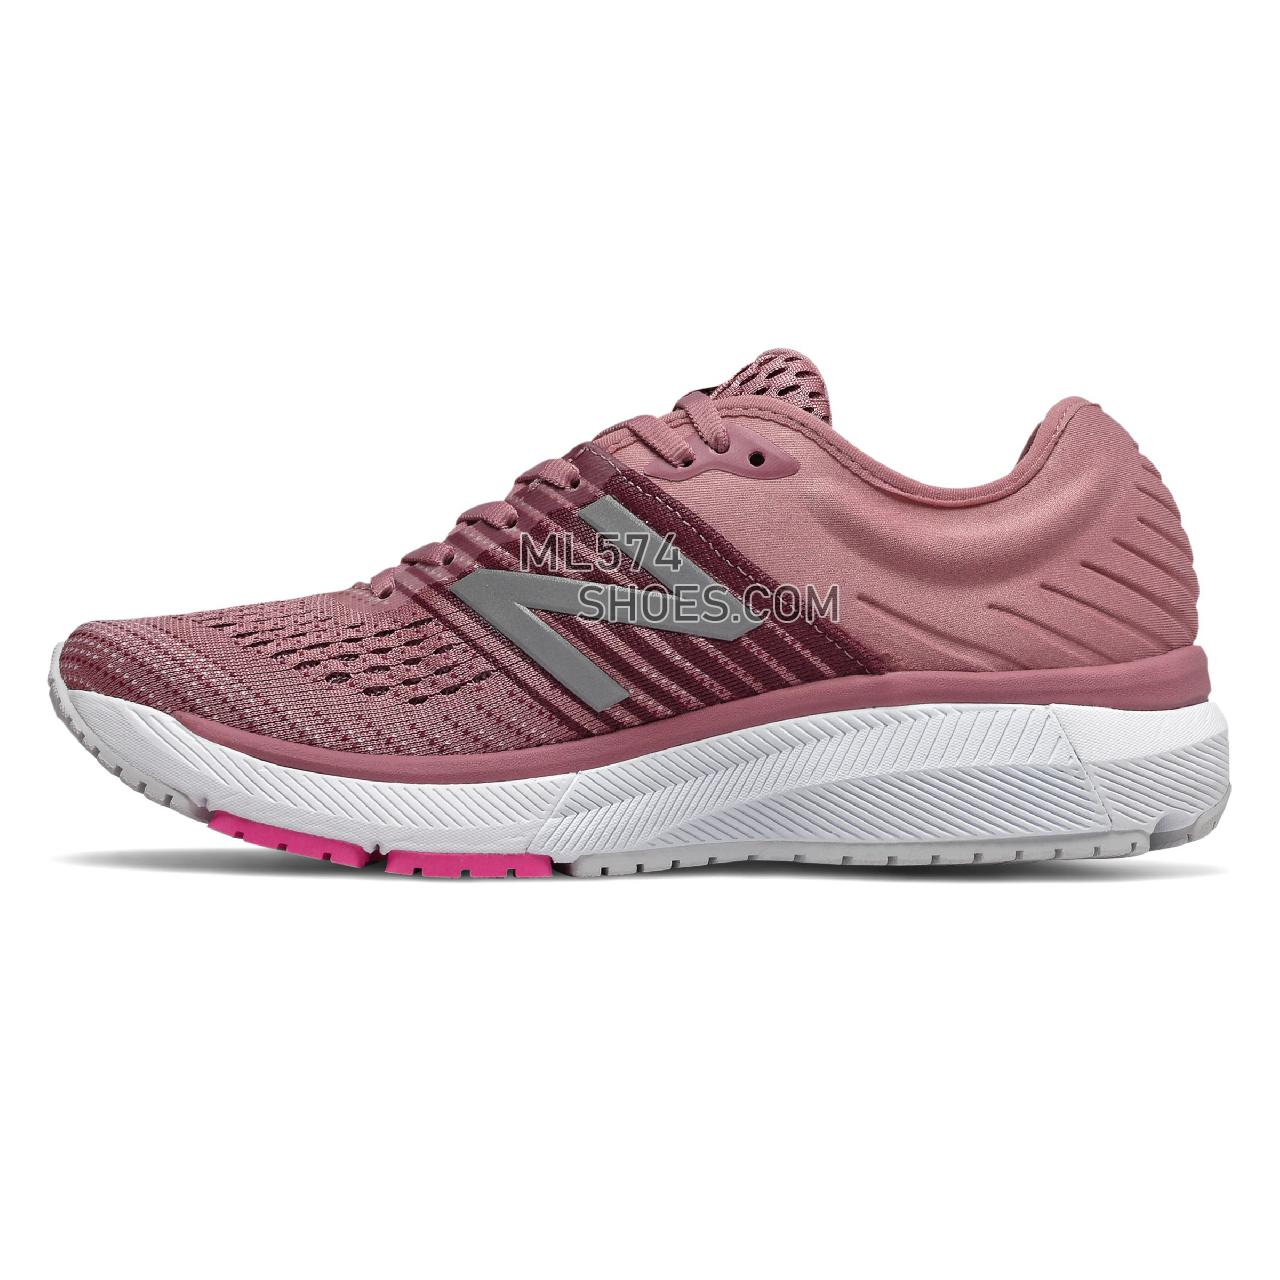 New Balance 860v10 - Women's Stability Running - Twilight Rose with Oxygen Pink and Peony - W860A10